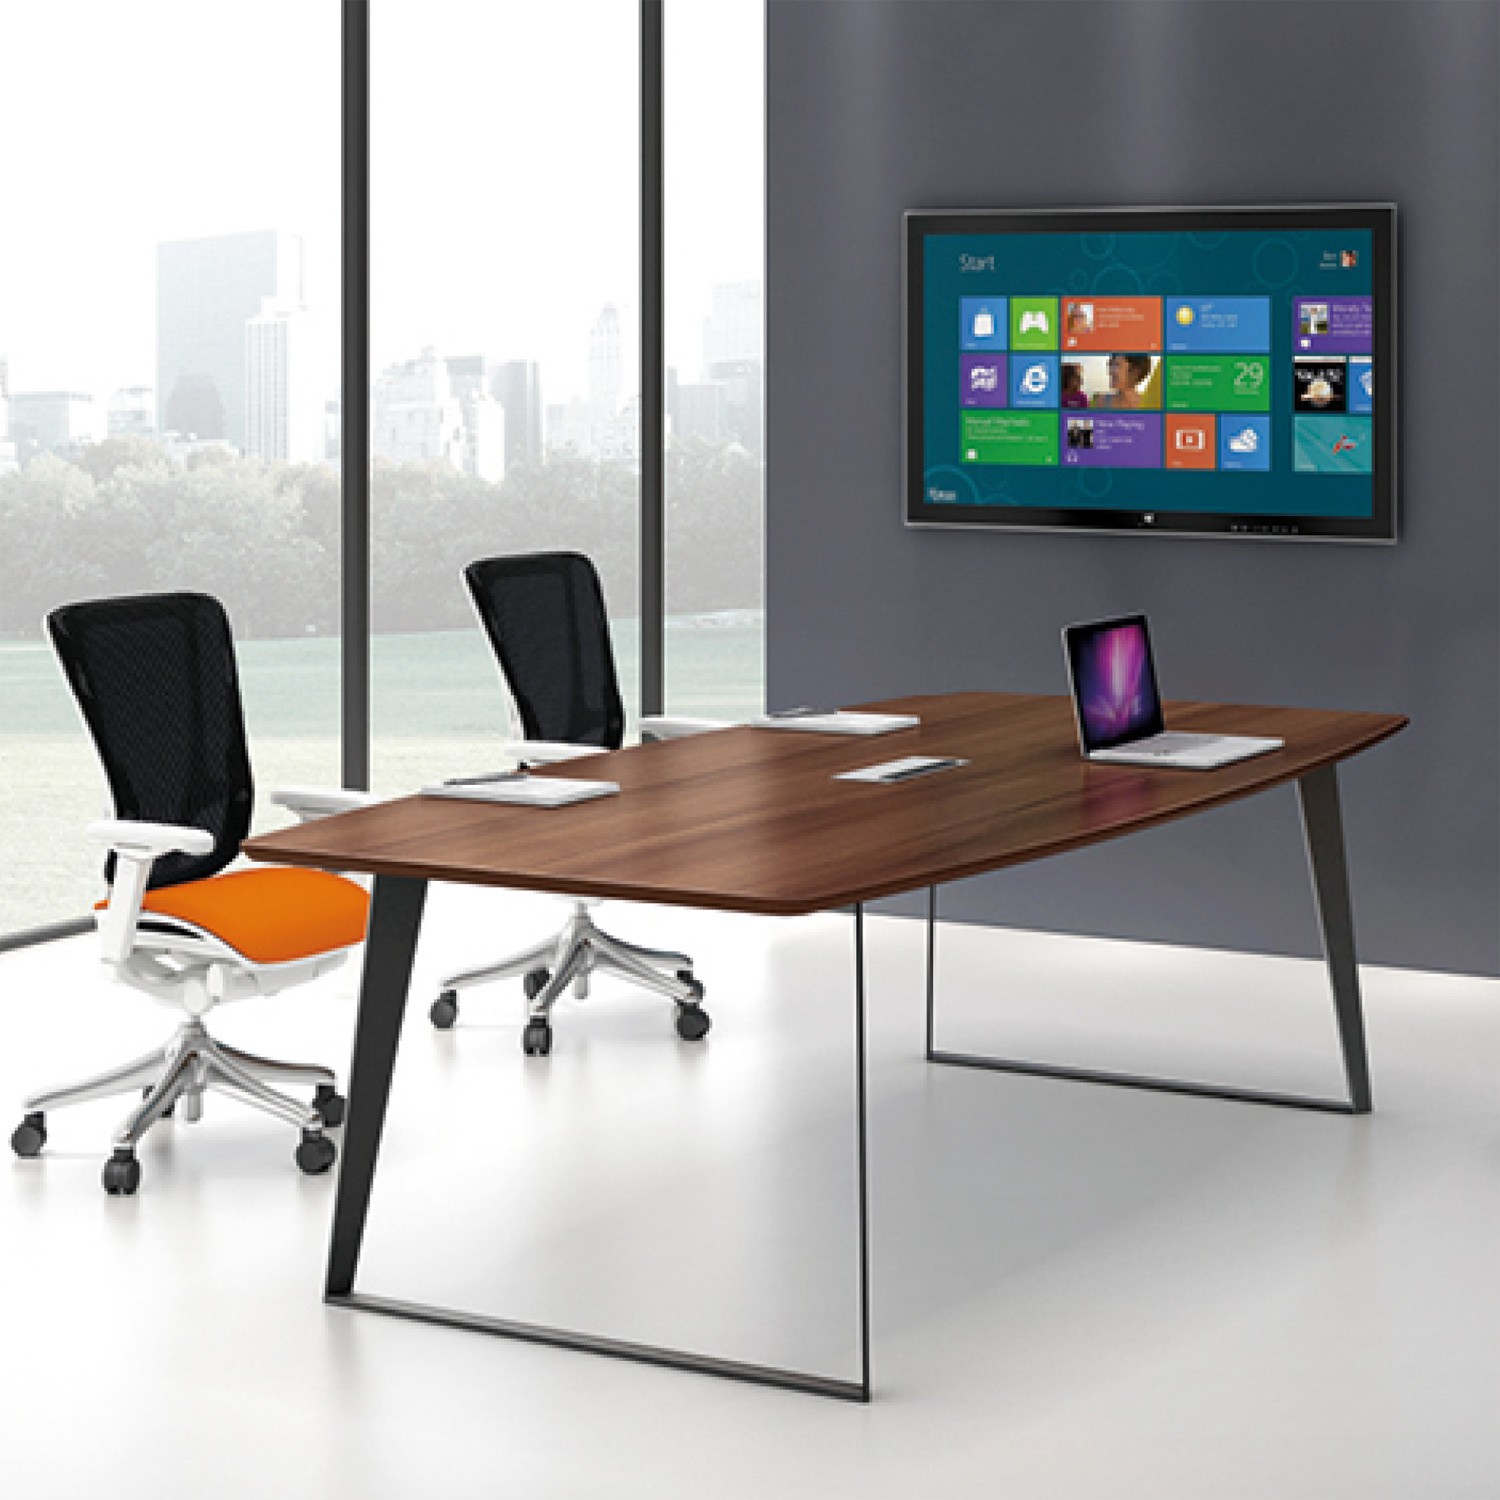 Customized Office Table Conference Desk Modern Meeting Table Mbh-006